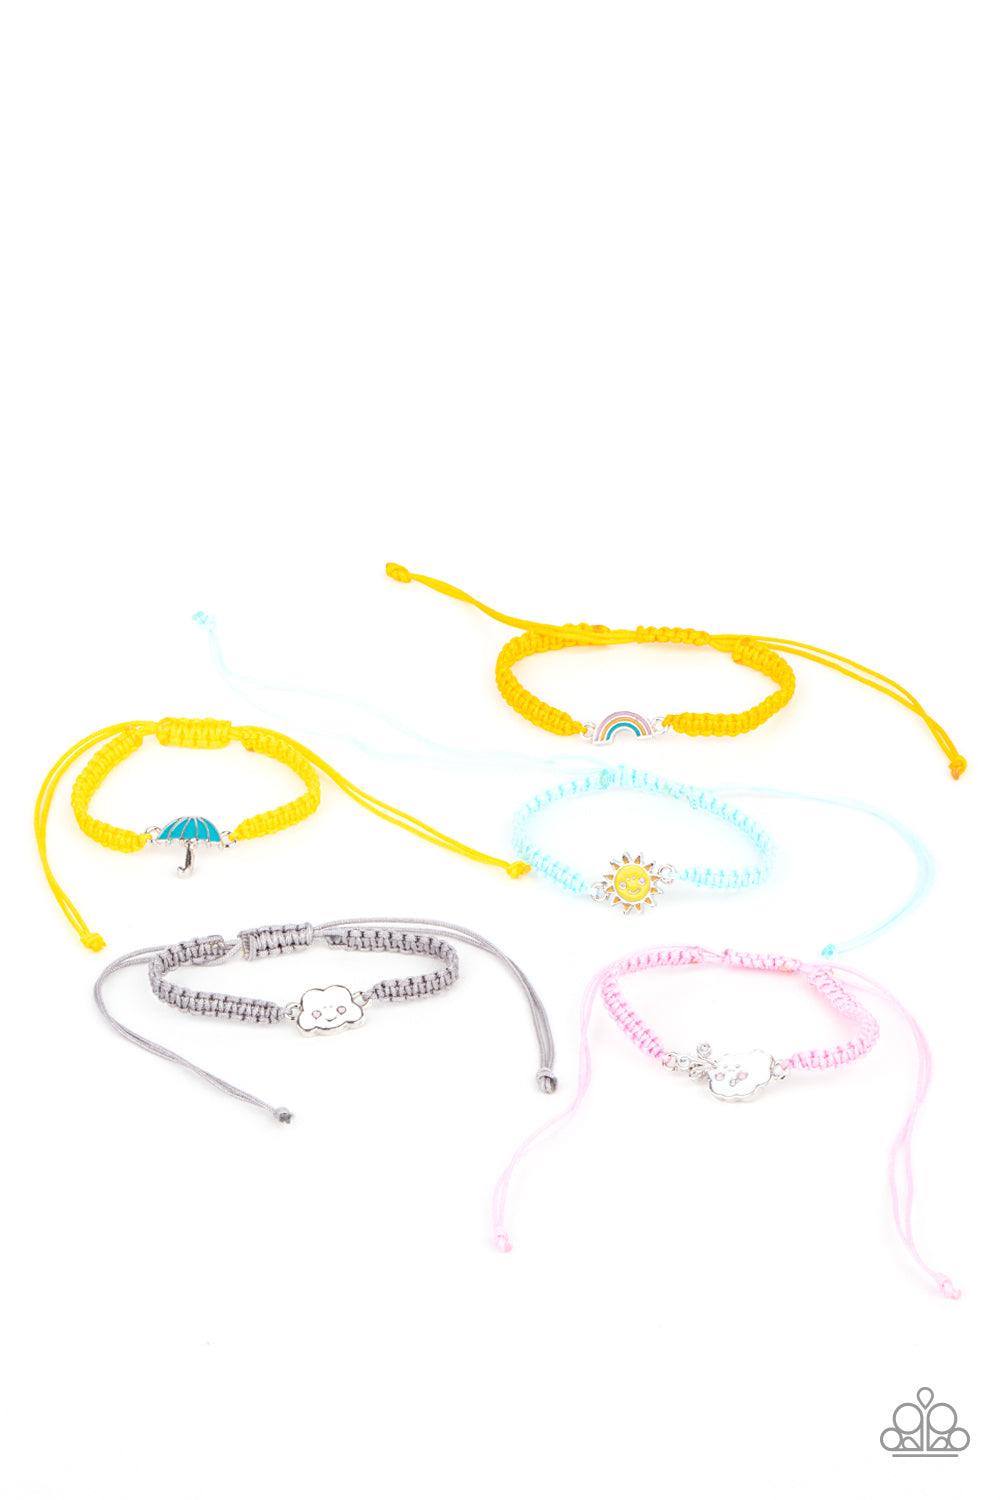  Starlet Shimmer Sun, Rainbow, Clouds, and Umbrella Bracelets - Jewelry by Bretta